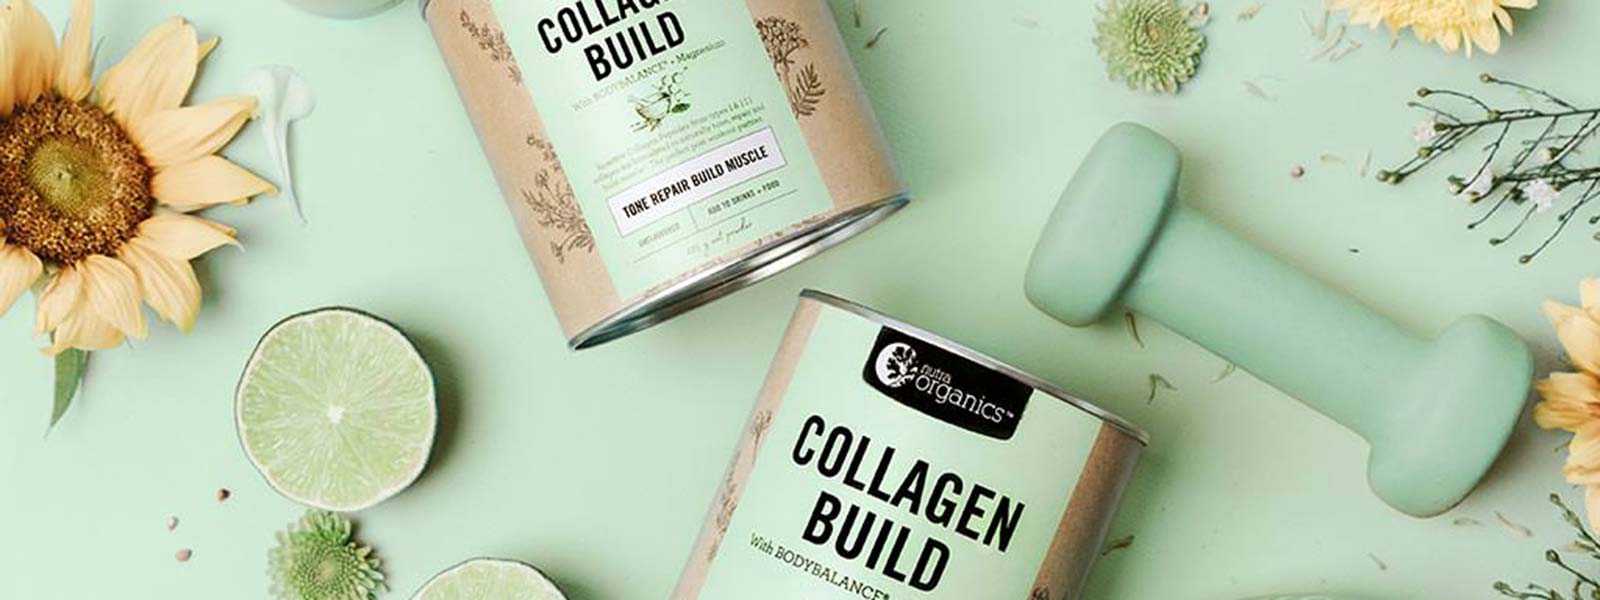 Nutra Organics Collagen Build styled image banner with mint green small dumbells, limes, flowers, on a light green background